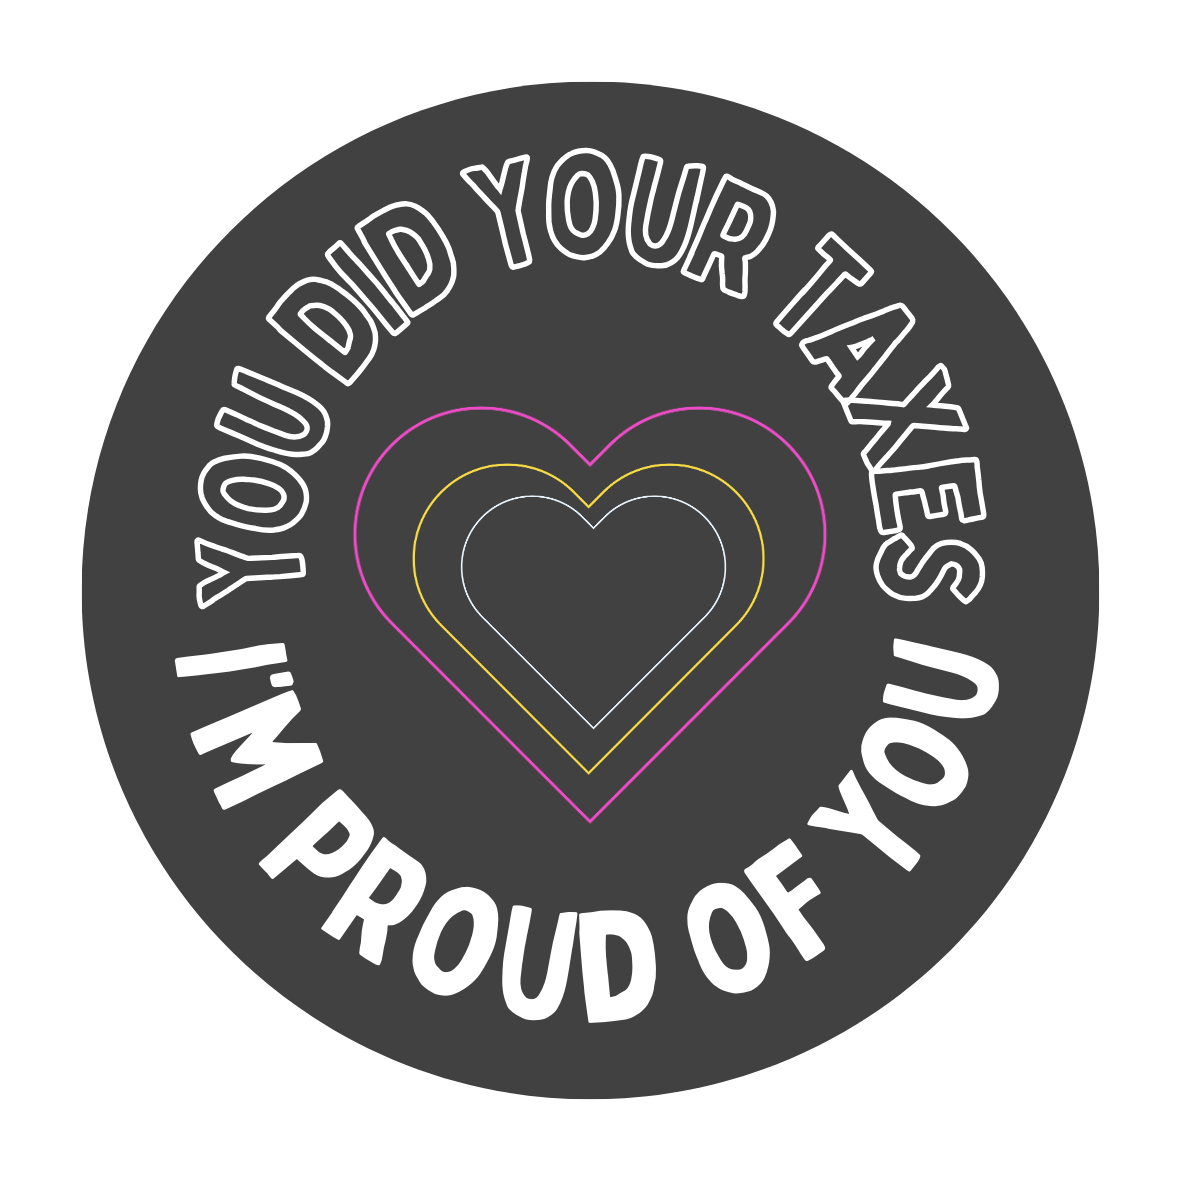 A black circle that reads "You did your taxes, I'm proud of you" aroud the edges with pink, yellow, and white hearts in the middle, like a badge.